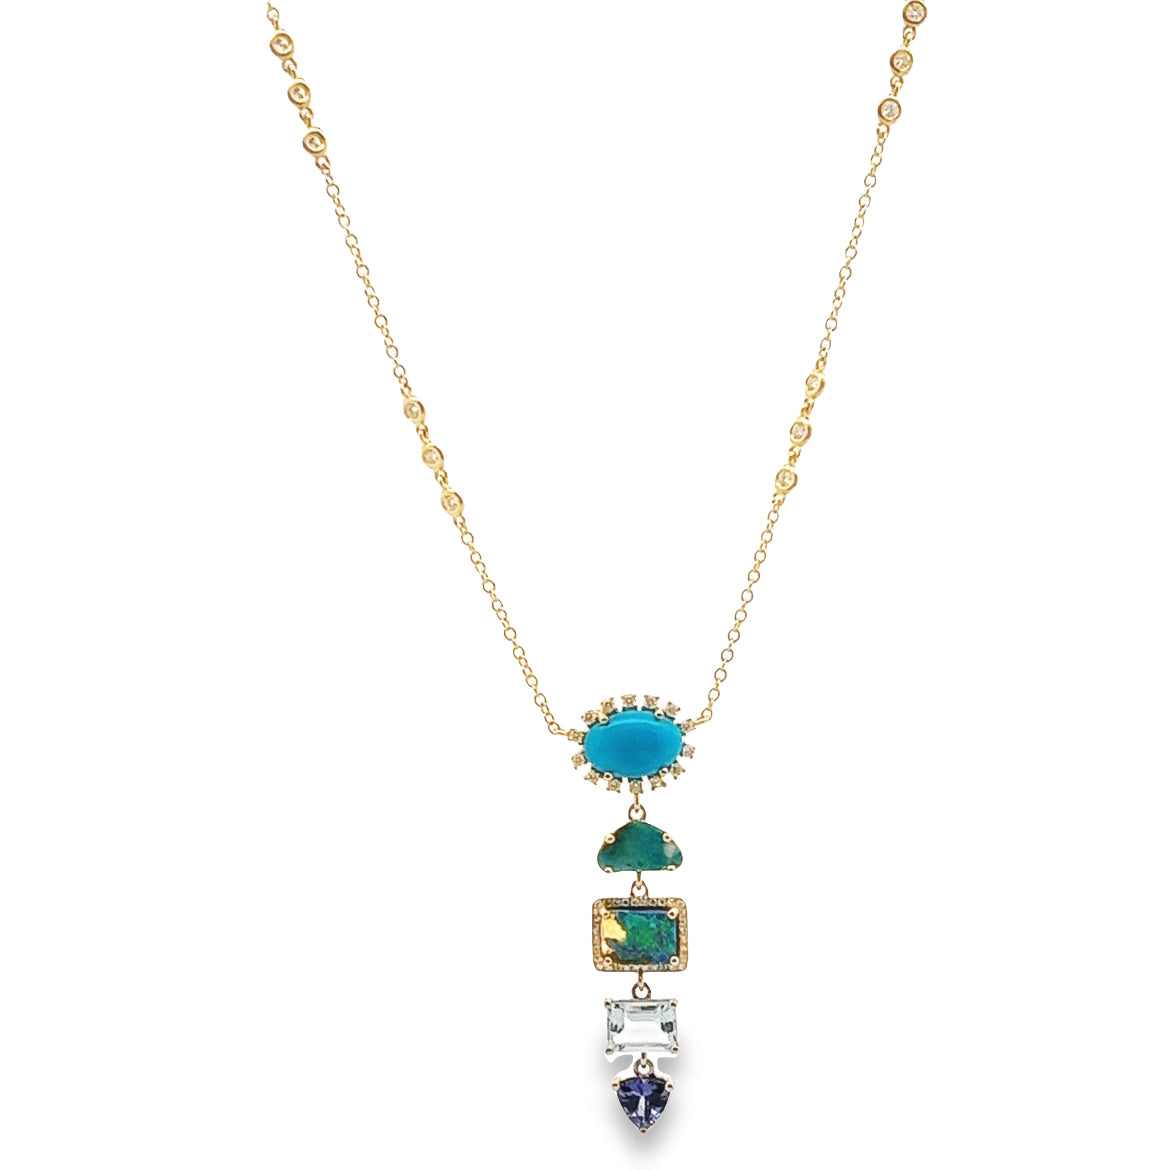 14K GOLD NECKLACE WITH PRECIOUS STONES